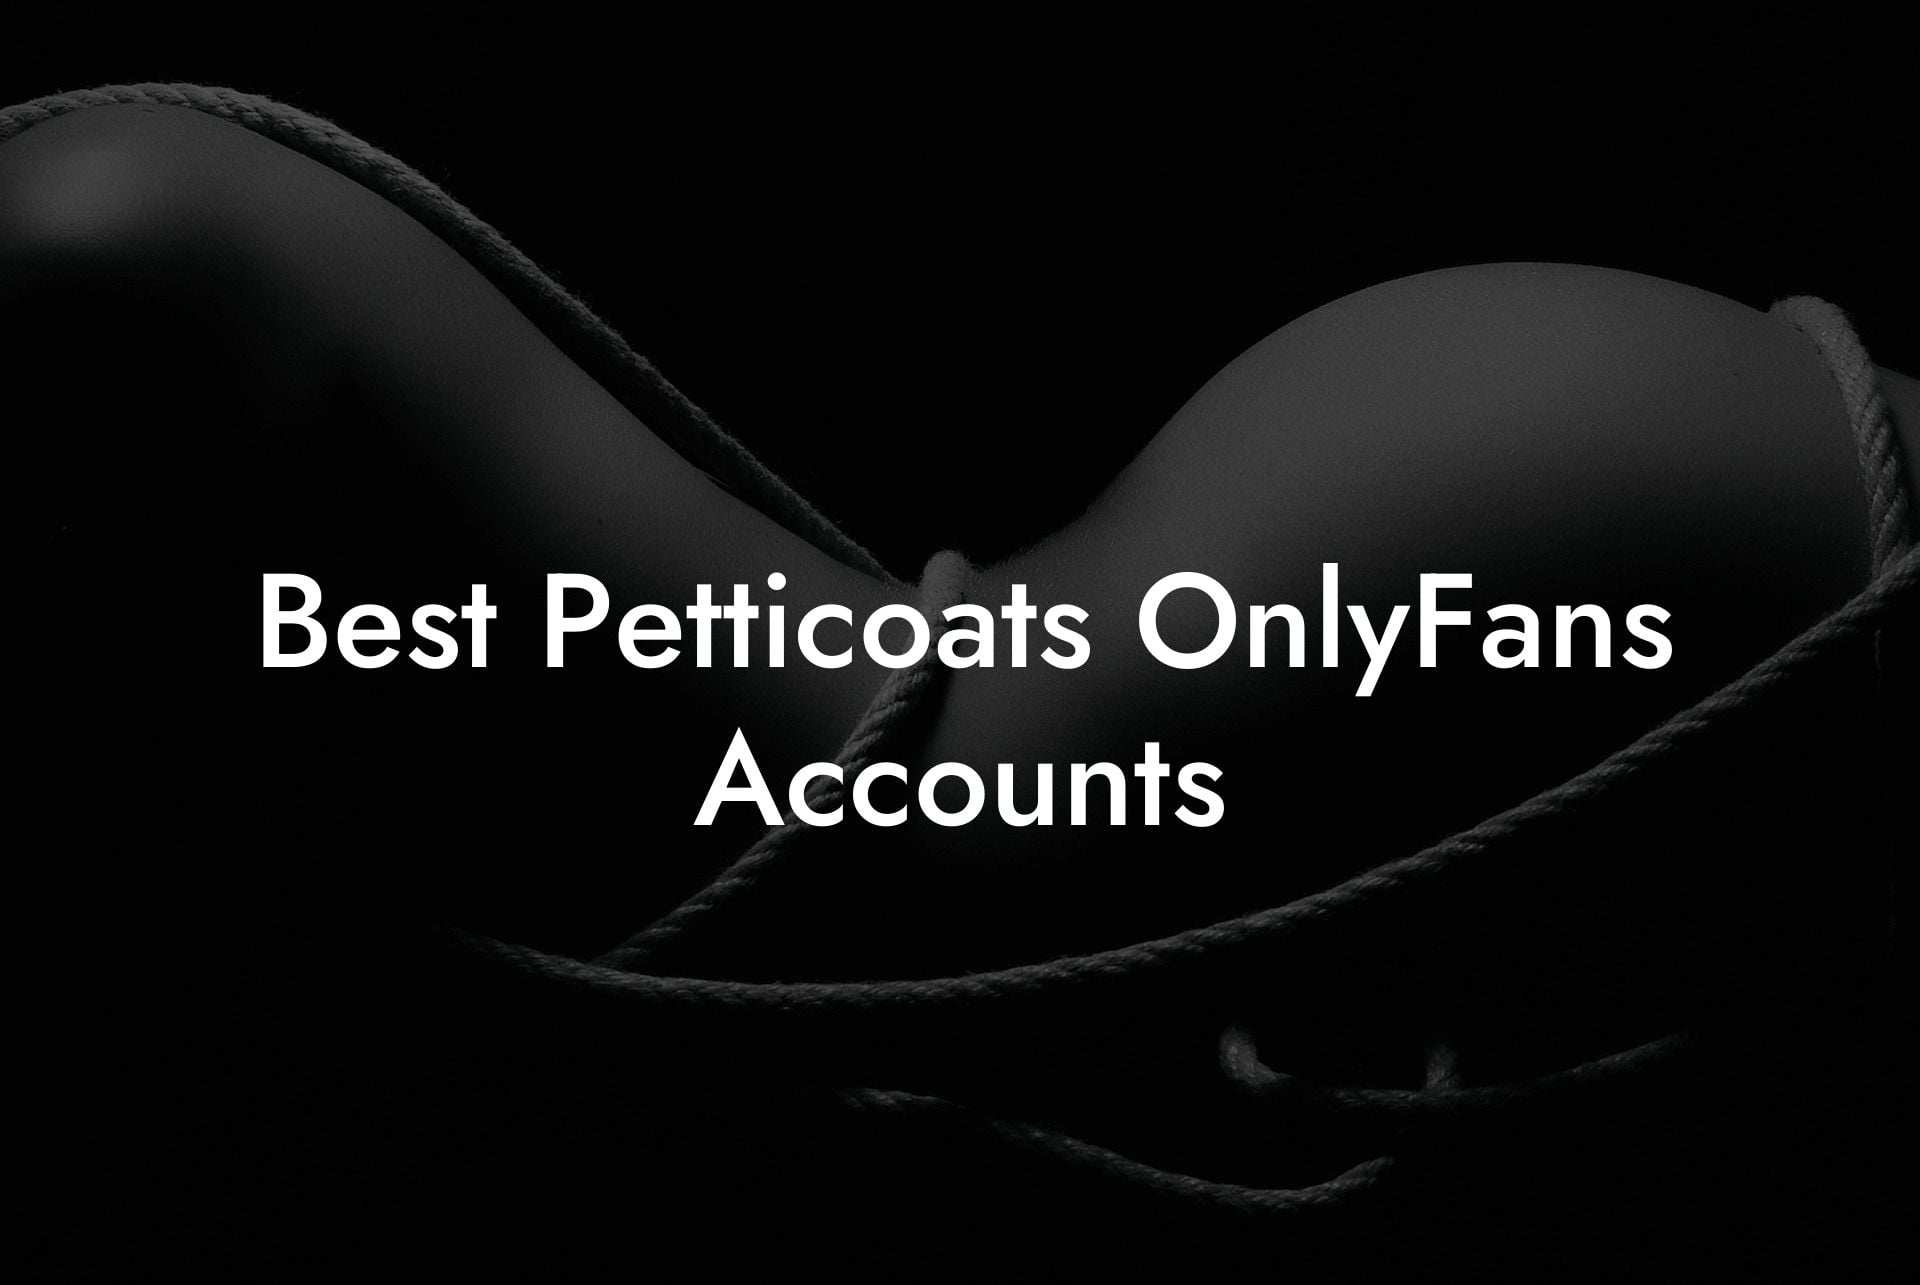 Best Petticoats OnlyFans Accounts